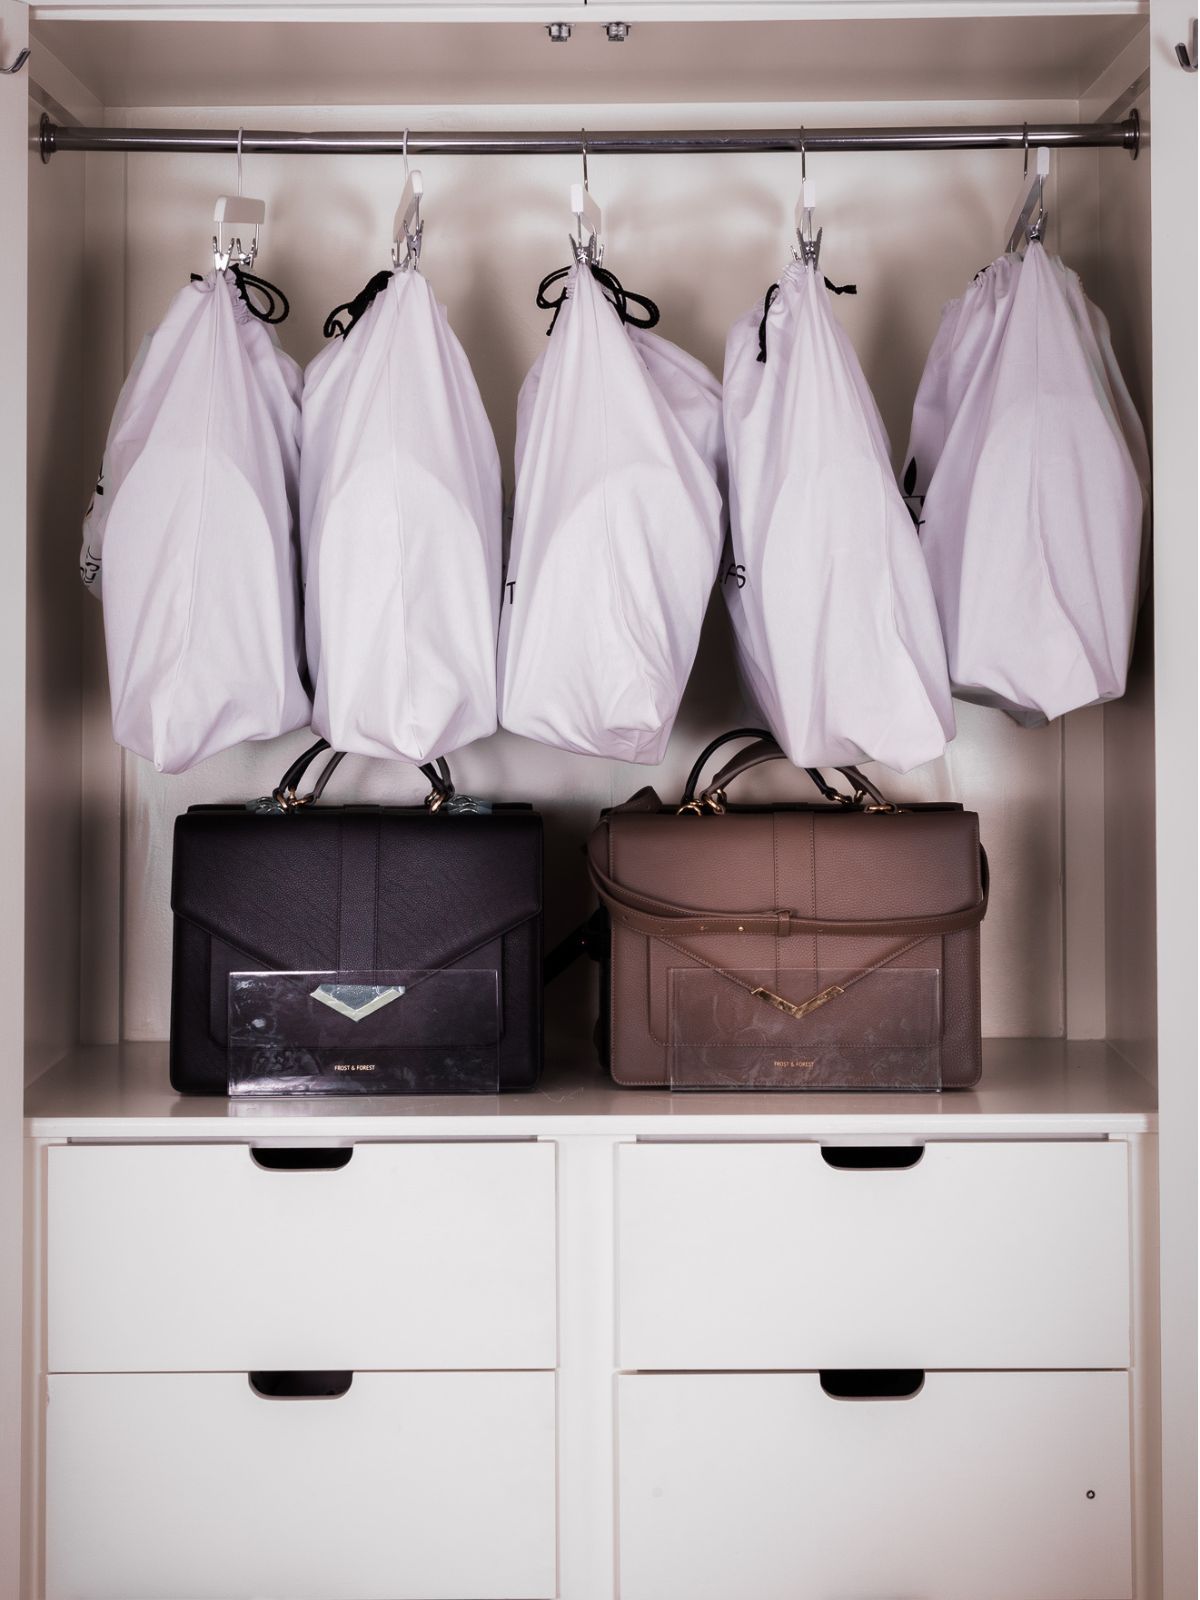 How To Store Handbags: 10 Tips for Cleaning & Avoiding Damage